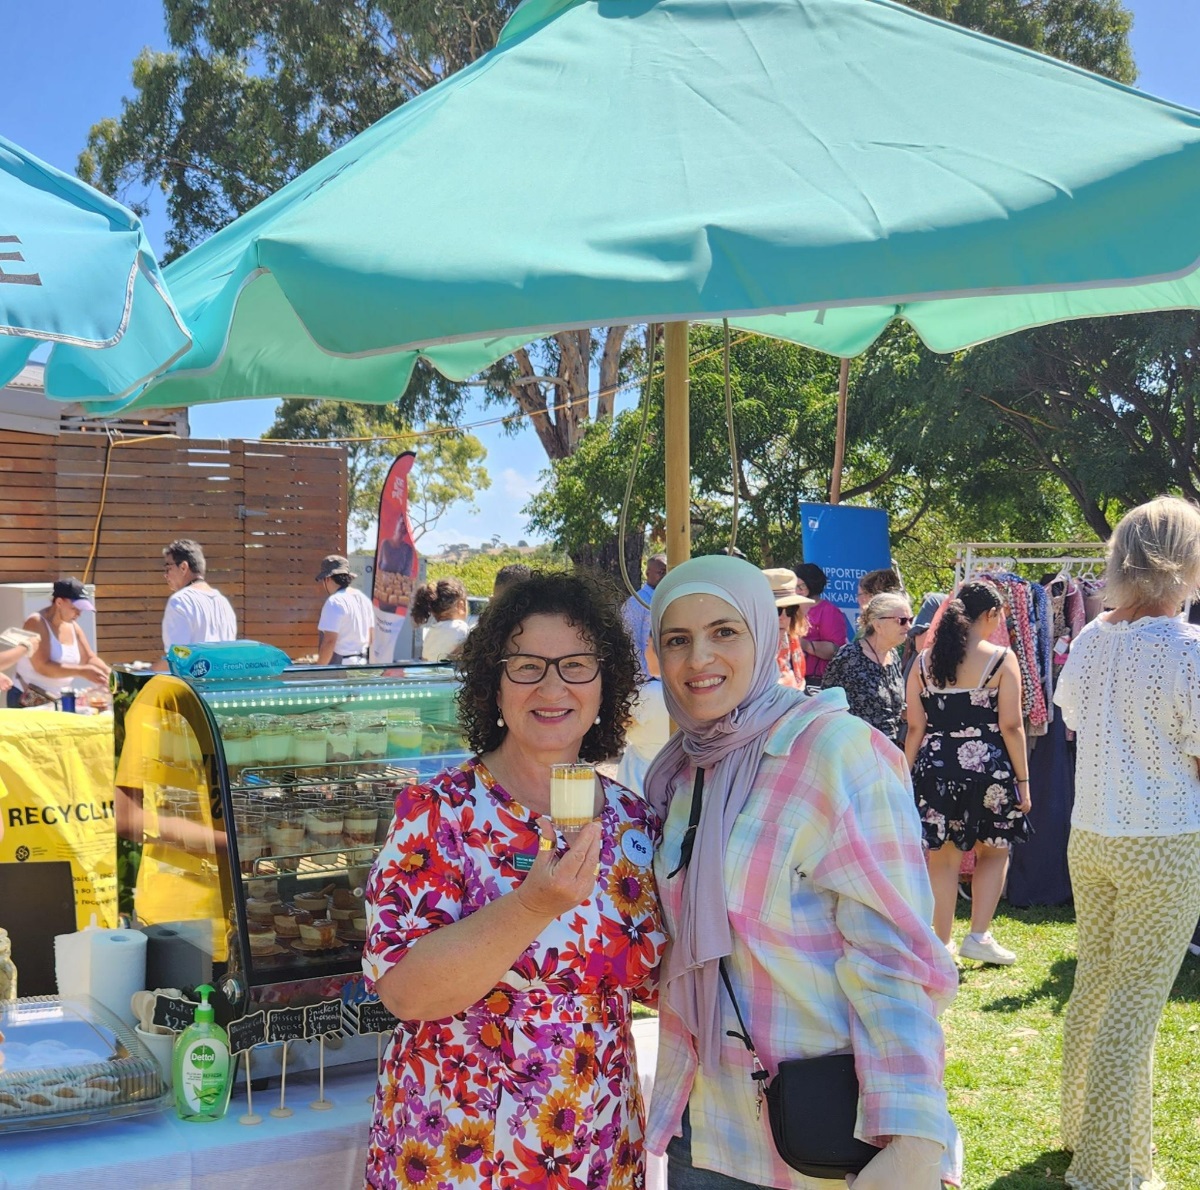 Councillor Marisa Bell smiles and holds a dessert alongside a resident wearing a headscarf under an umbrella.